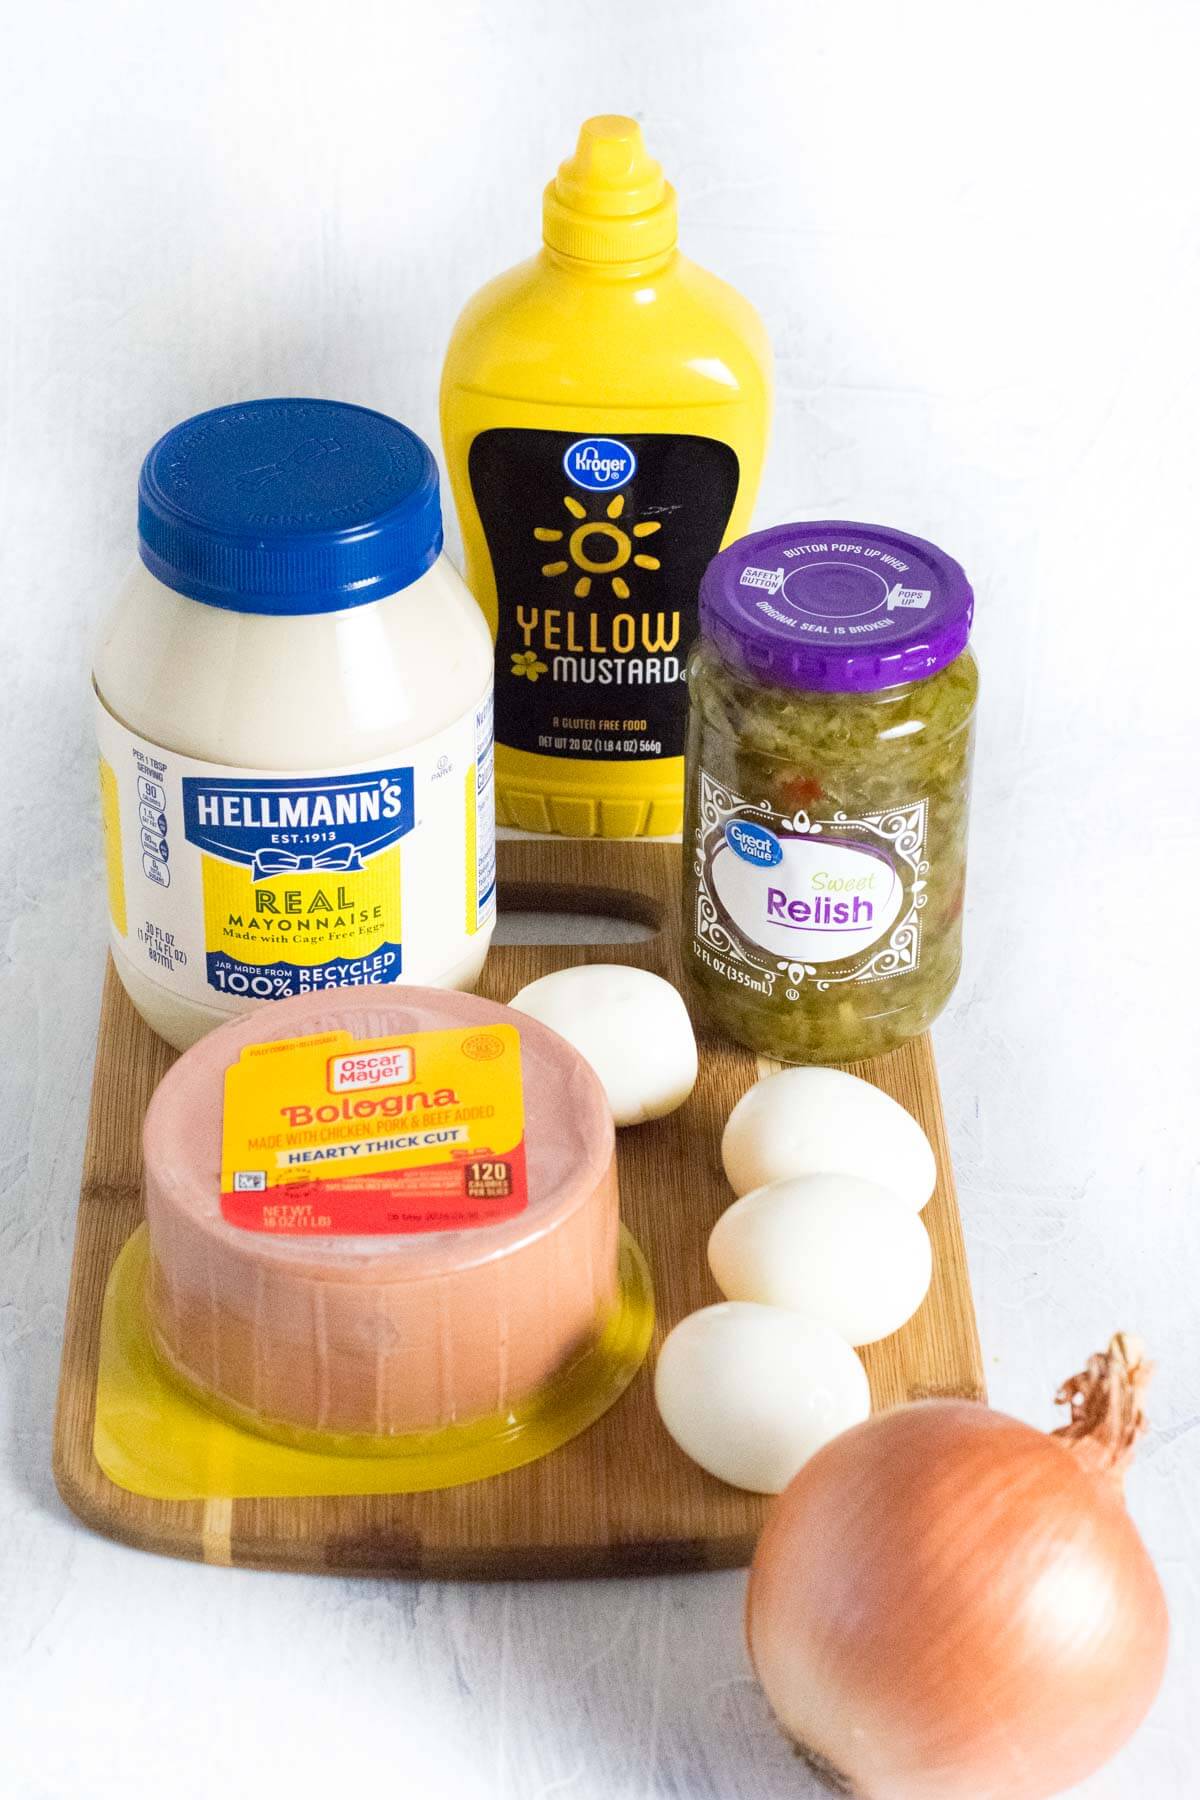 Showing bologna salad sandwich spread ingredients.